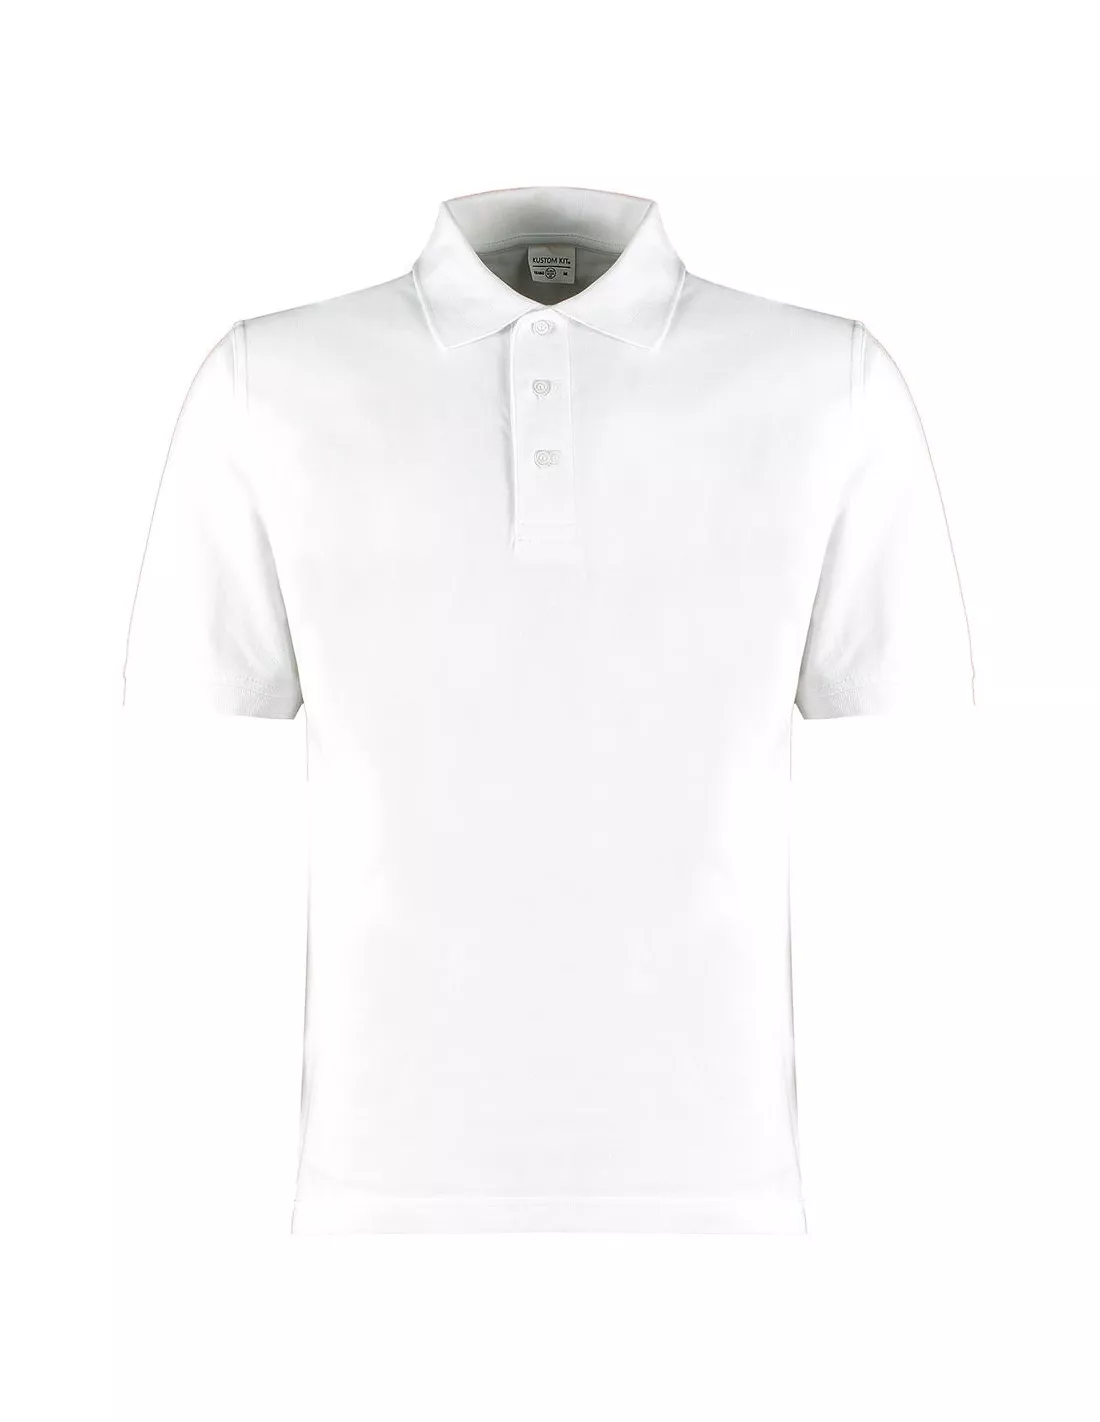 Polo Classic Fit lavable hasta 60°C